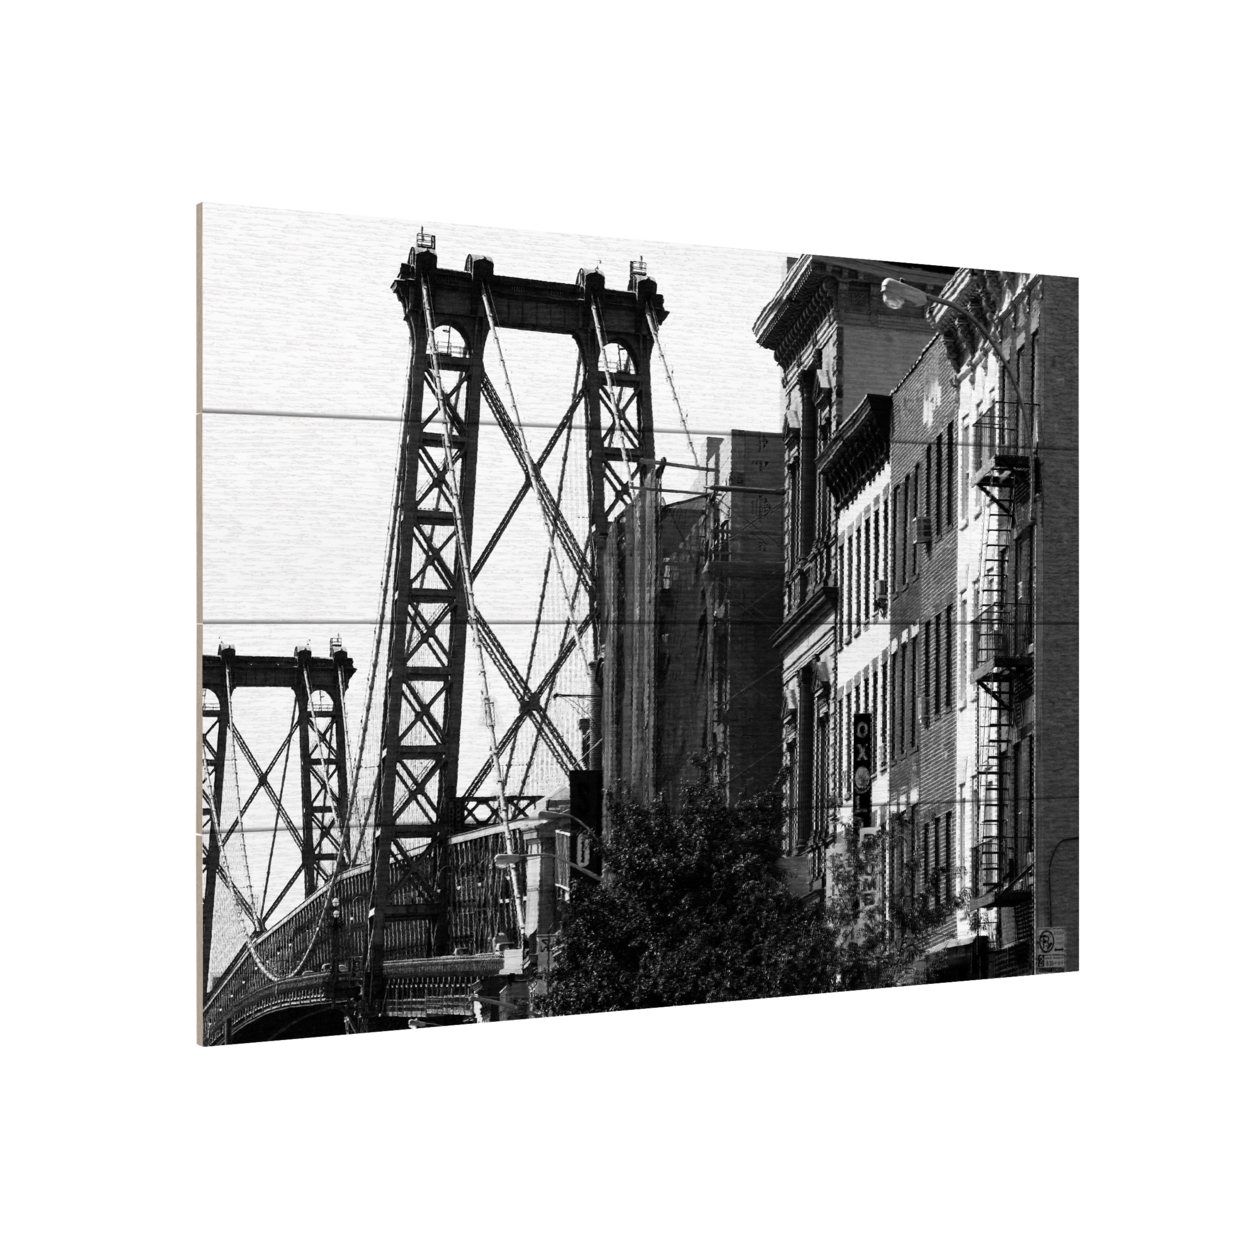 Wall Art 12 X 16 Inches Titled Williamsburg Bridge Ready To Hang Printed On Wooden Planks